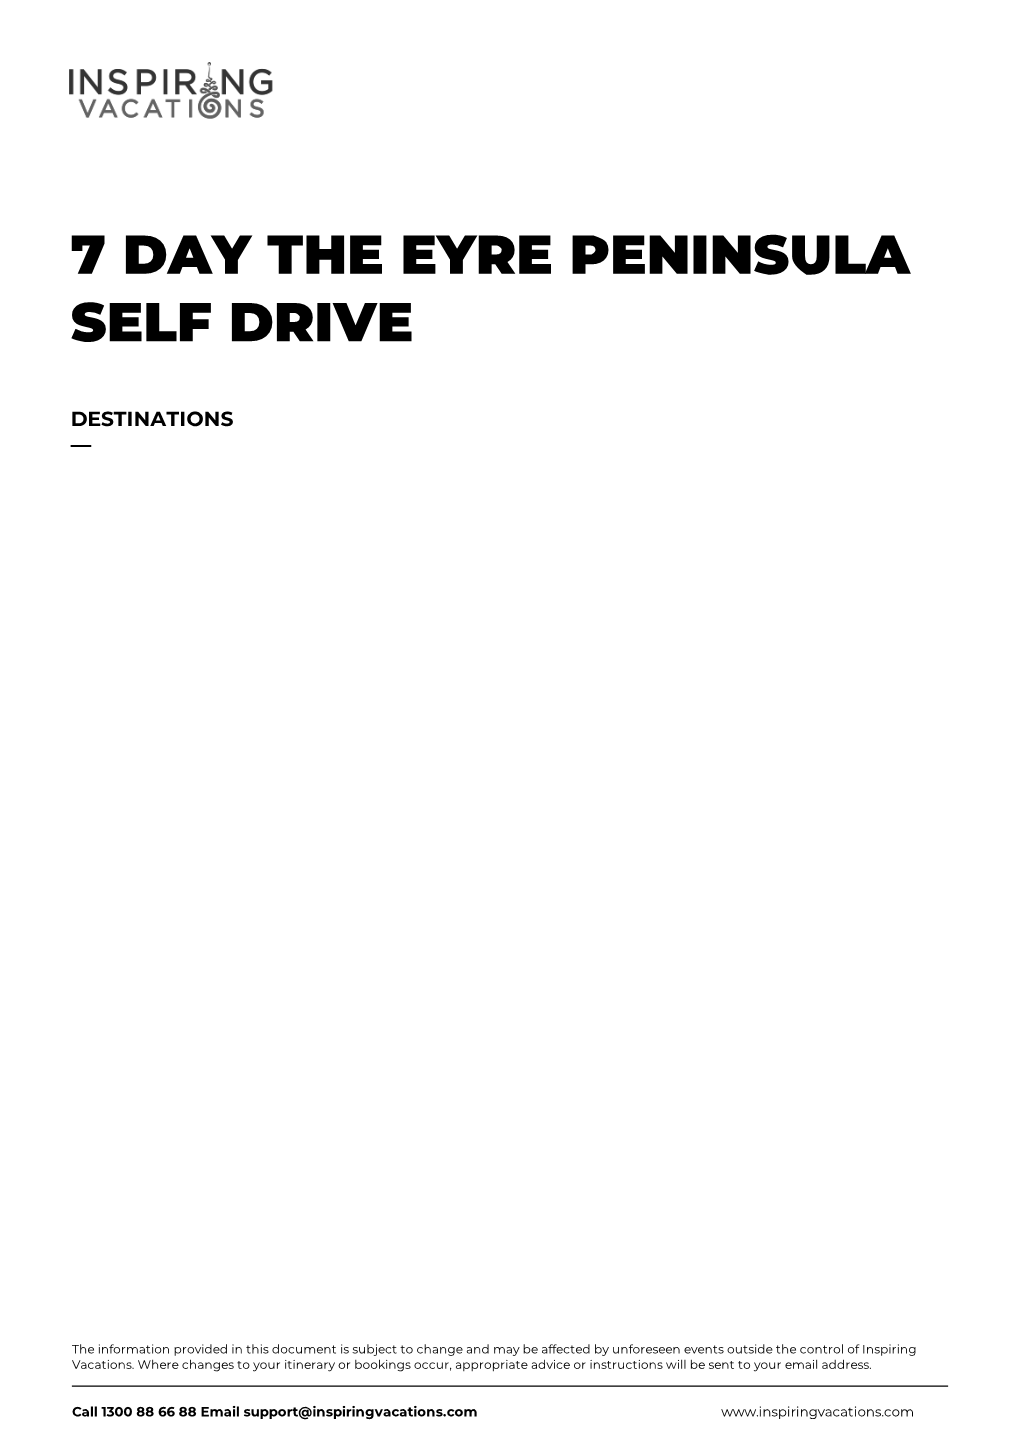 7 Day the Eyre Peninsula Self Drive